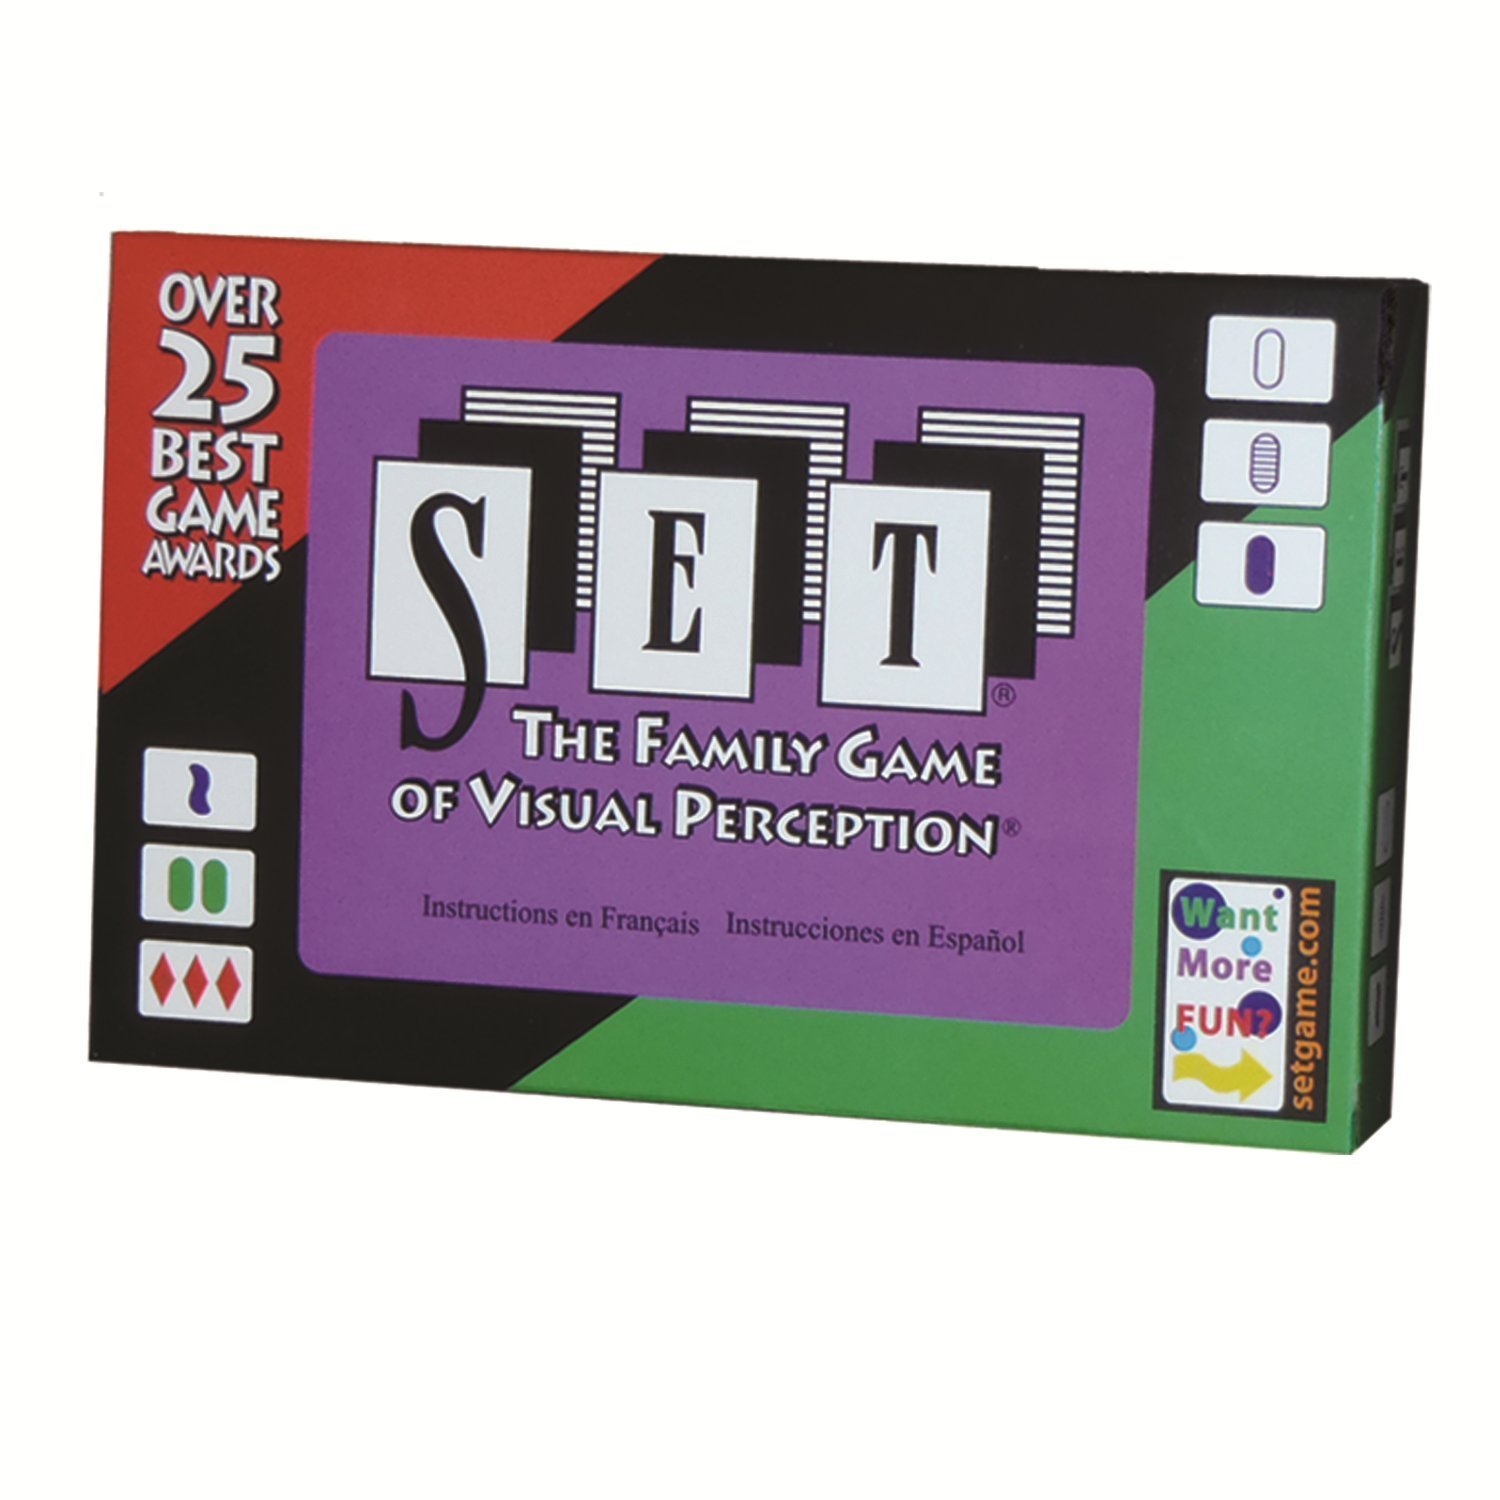 Set is a brain-bending but super fun card game that the entire family will enjoy playing together.